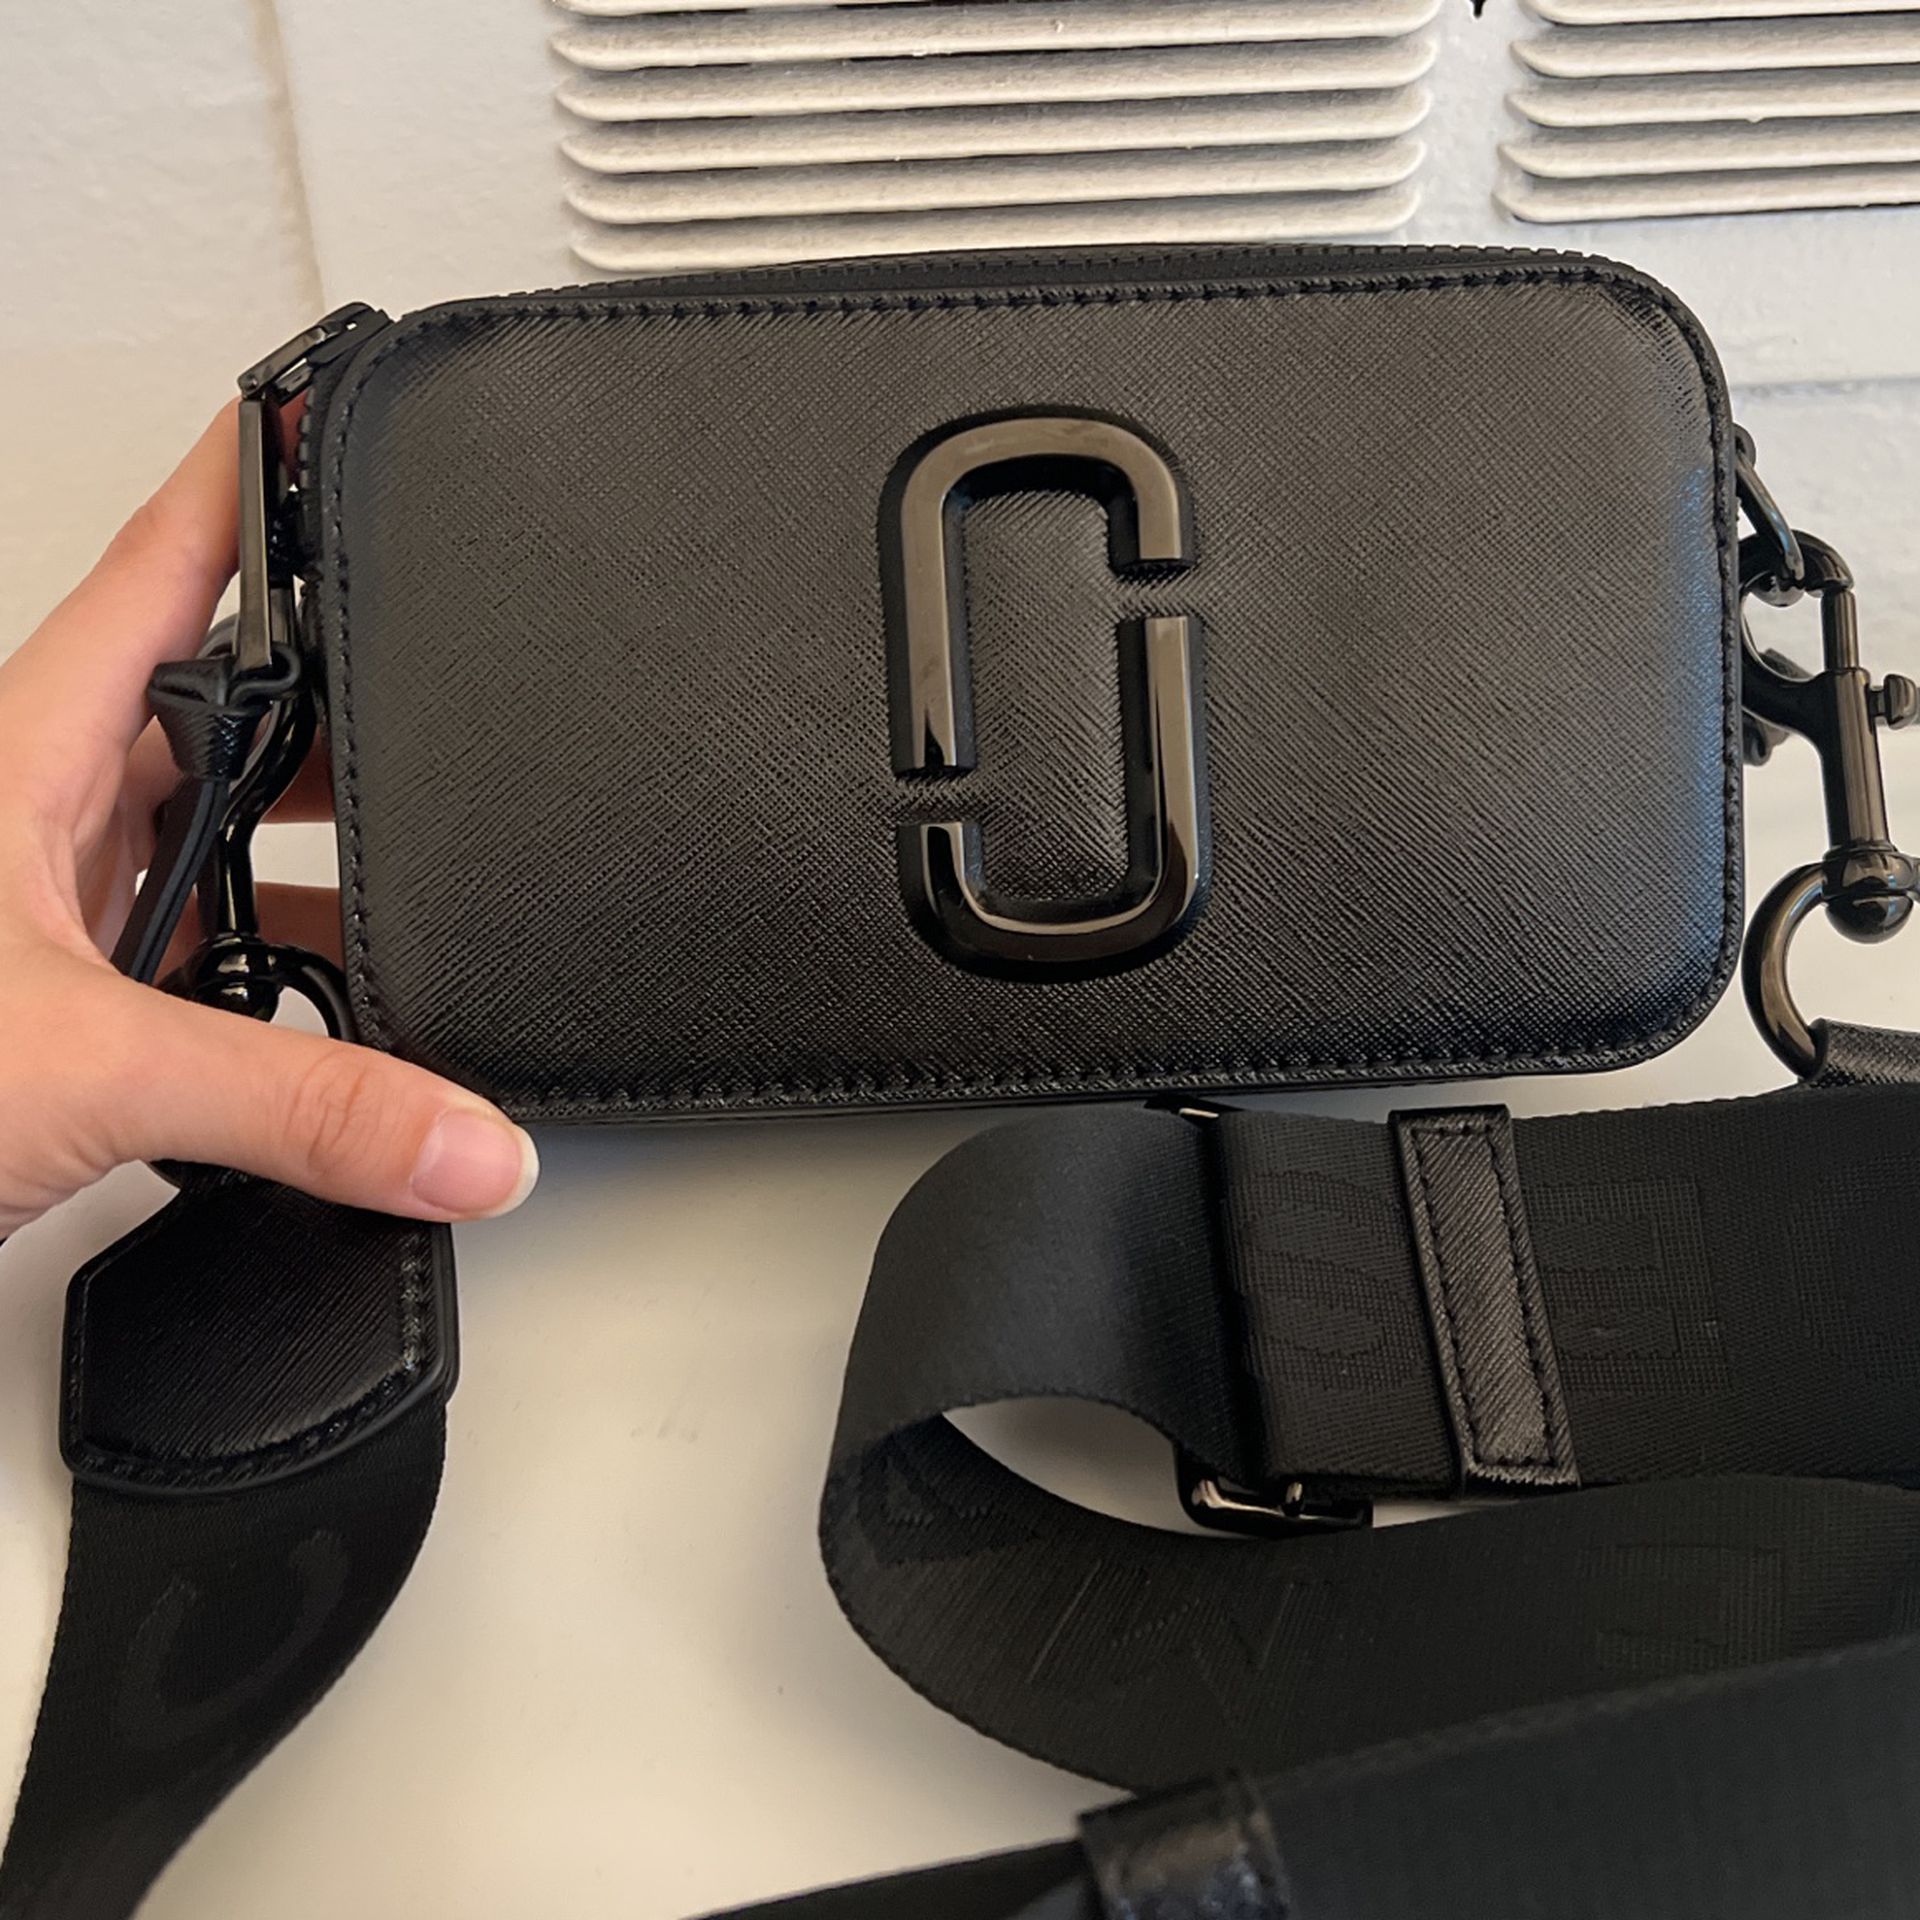 Mac Jacob Snapshot Bag for Sale in Hawthorne, CA - OfferUp